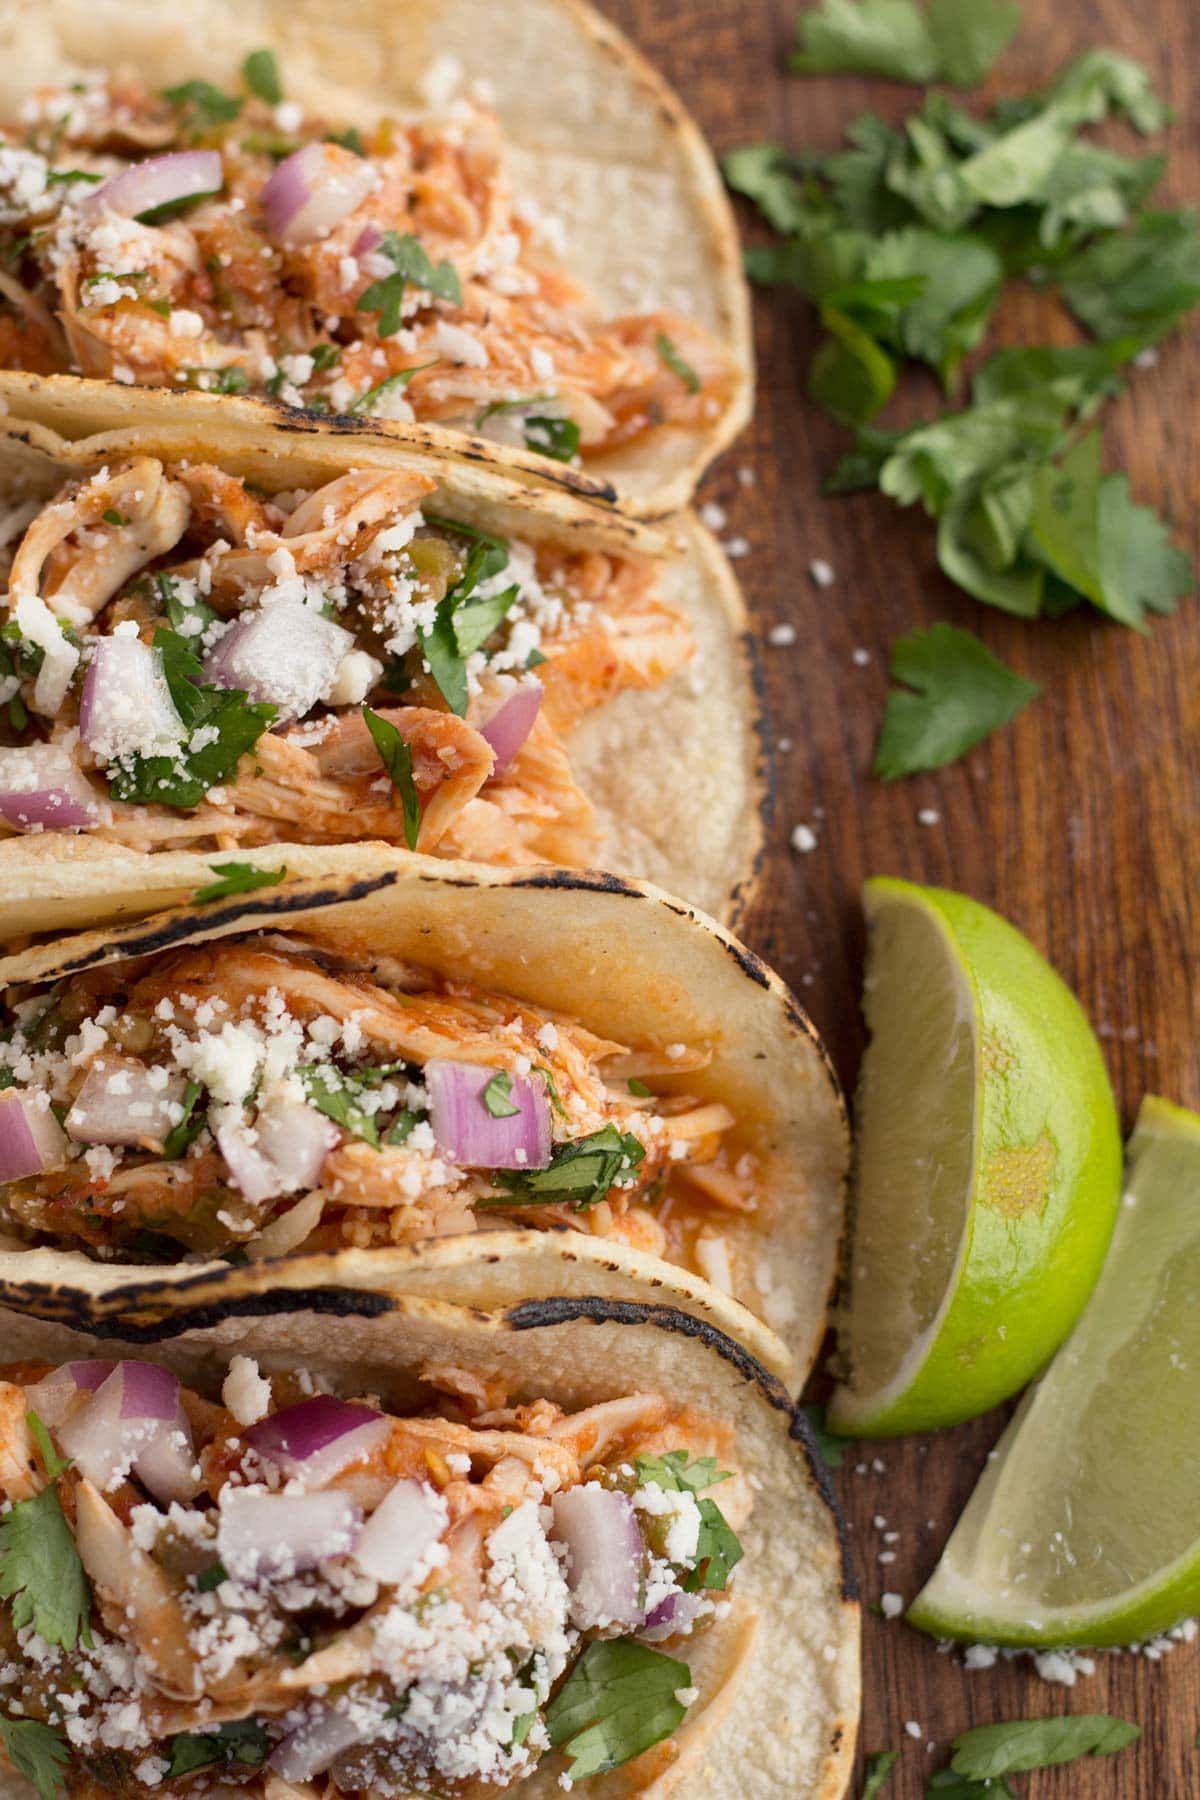 Tacos filled with chicken tinga and topped with crumbly Mexican cheese, cilantro, and Onion.